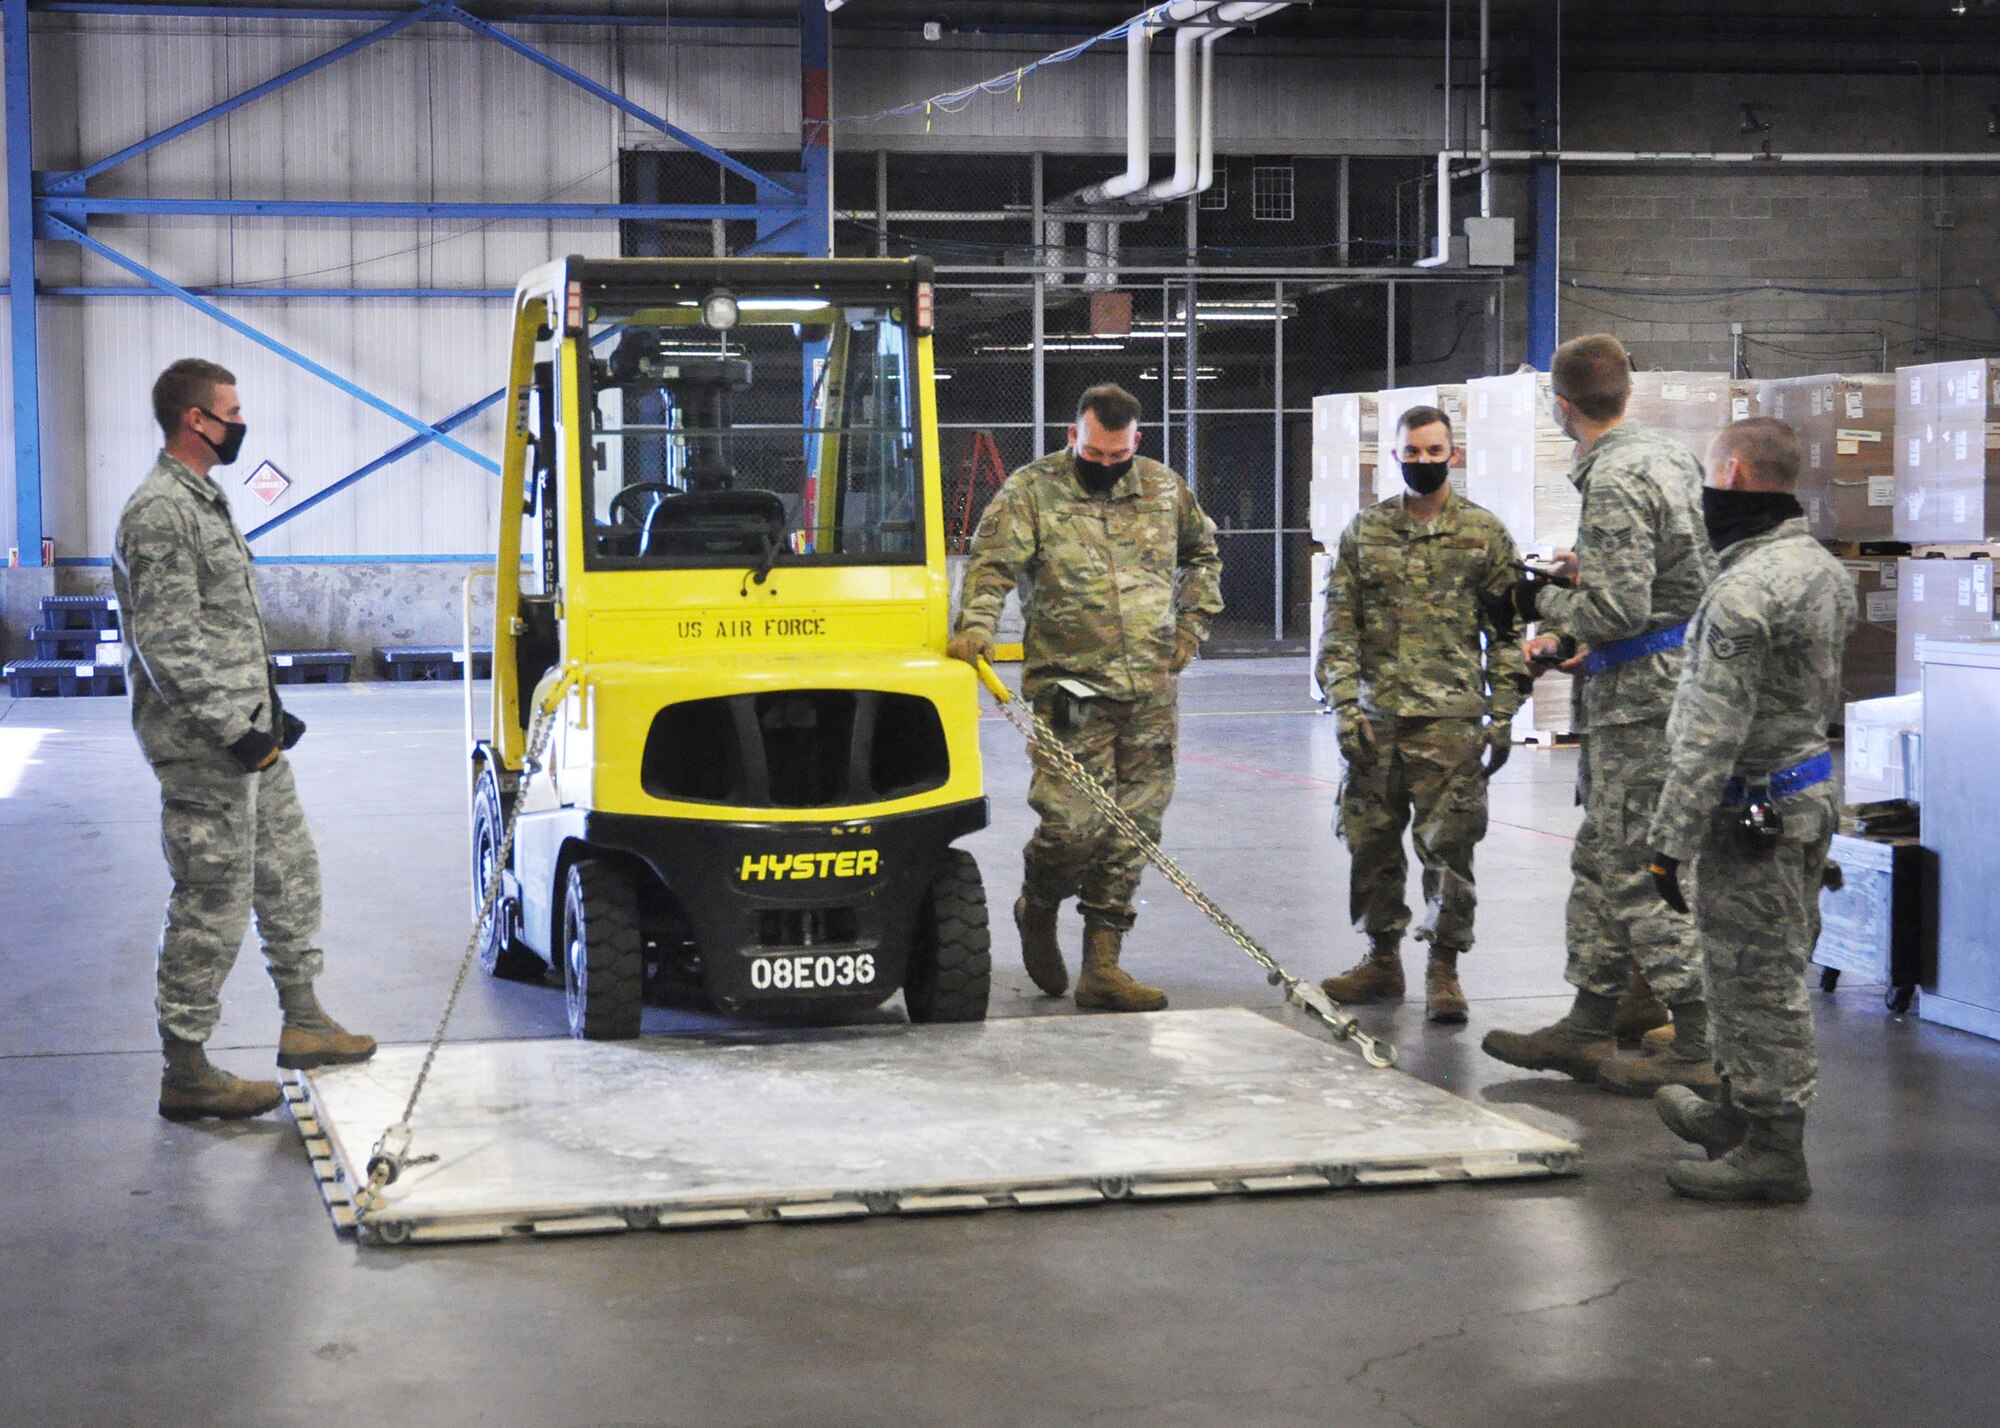 Airmen of the 87th Aerial Port Squadron use chains to restrain a 463L pallet (a standardized pallet used for transporting military air cargo). This challenge simulated tying down a vehicle on a C-17 Globemaster III and calculated the effectiveness angle of the chains. A forklift was backed up to the edge of the pallet, and the group was given two different angles and lengths to figure out the effective restraint that each chain would provide.